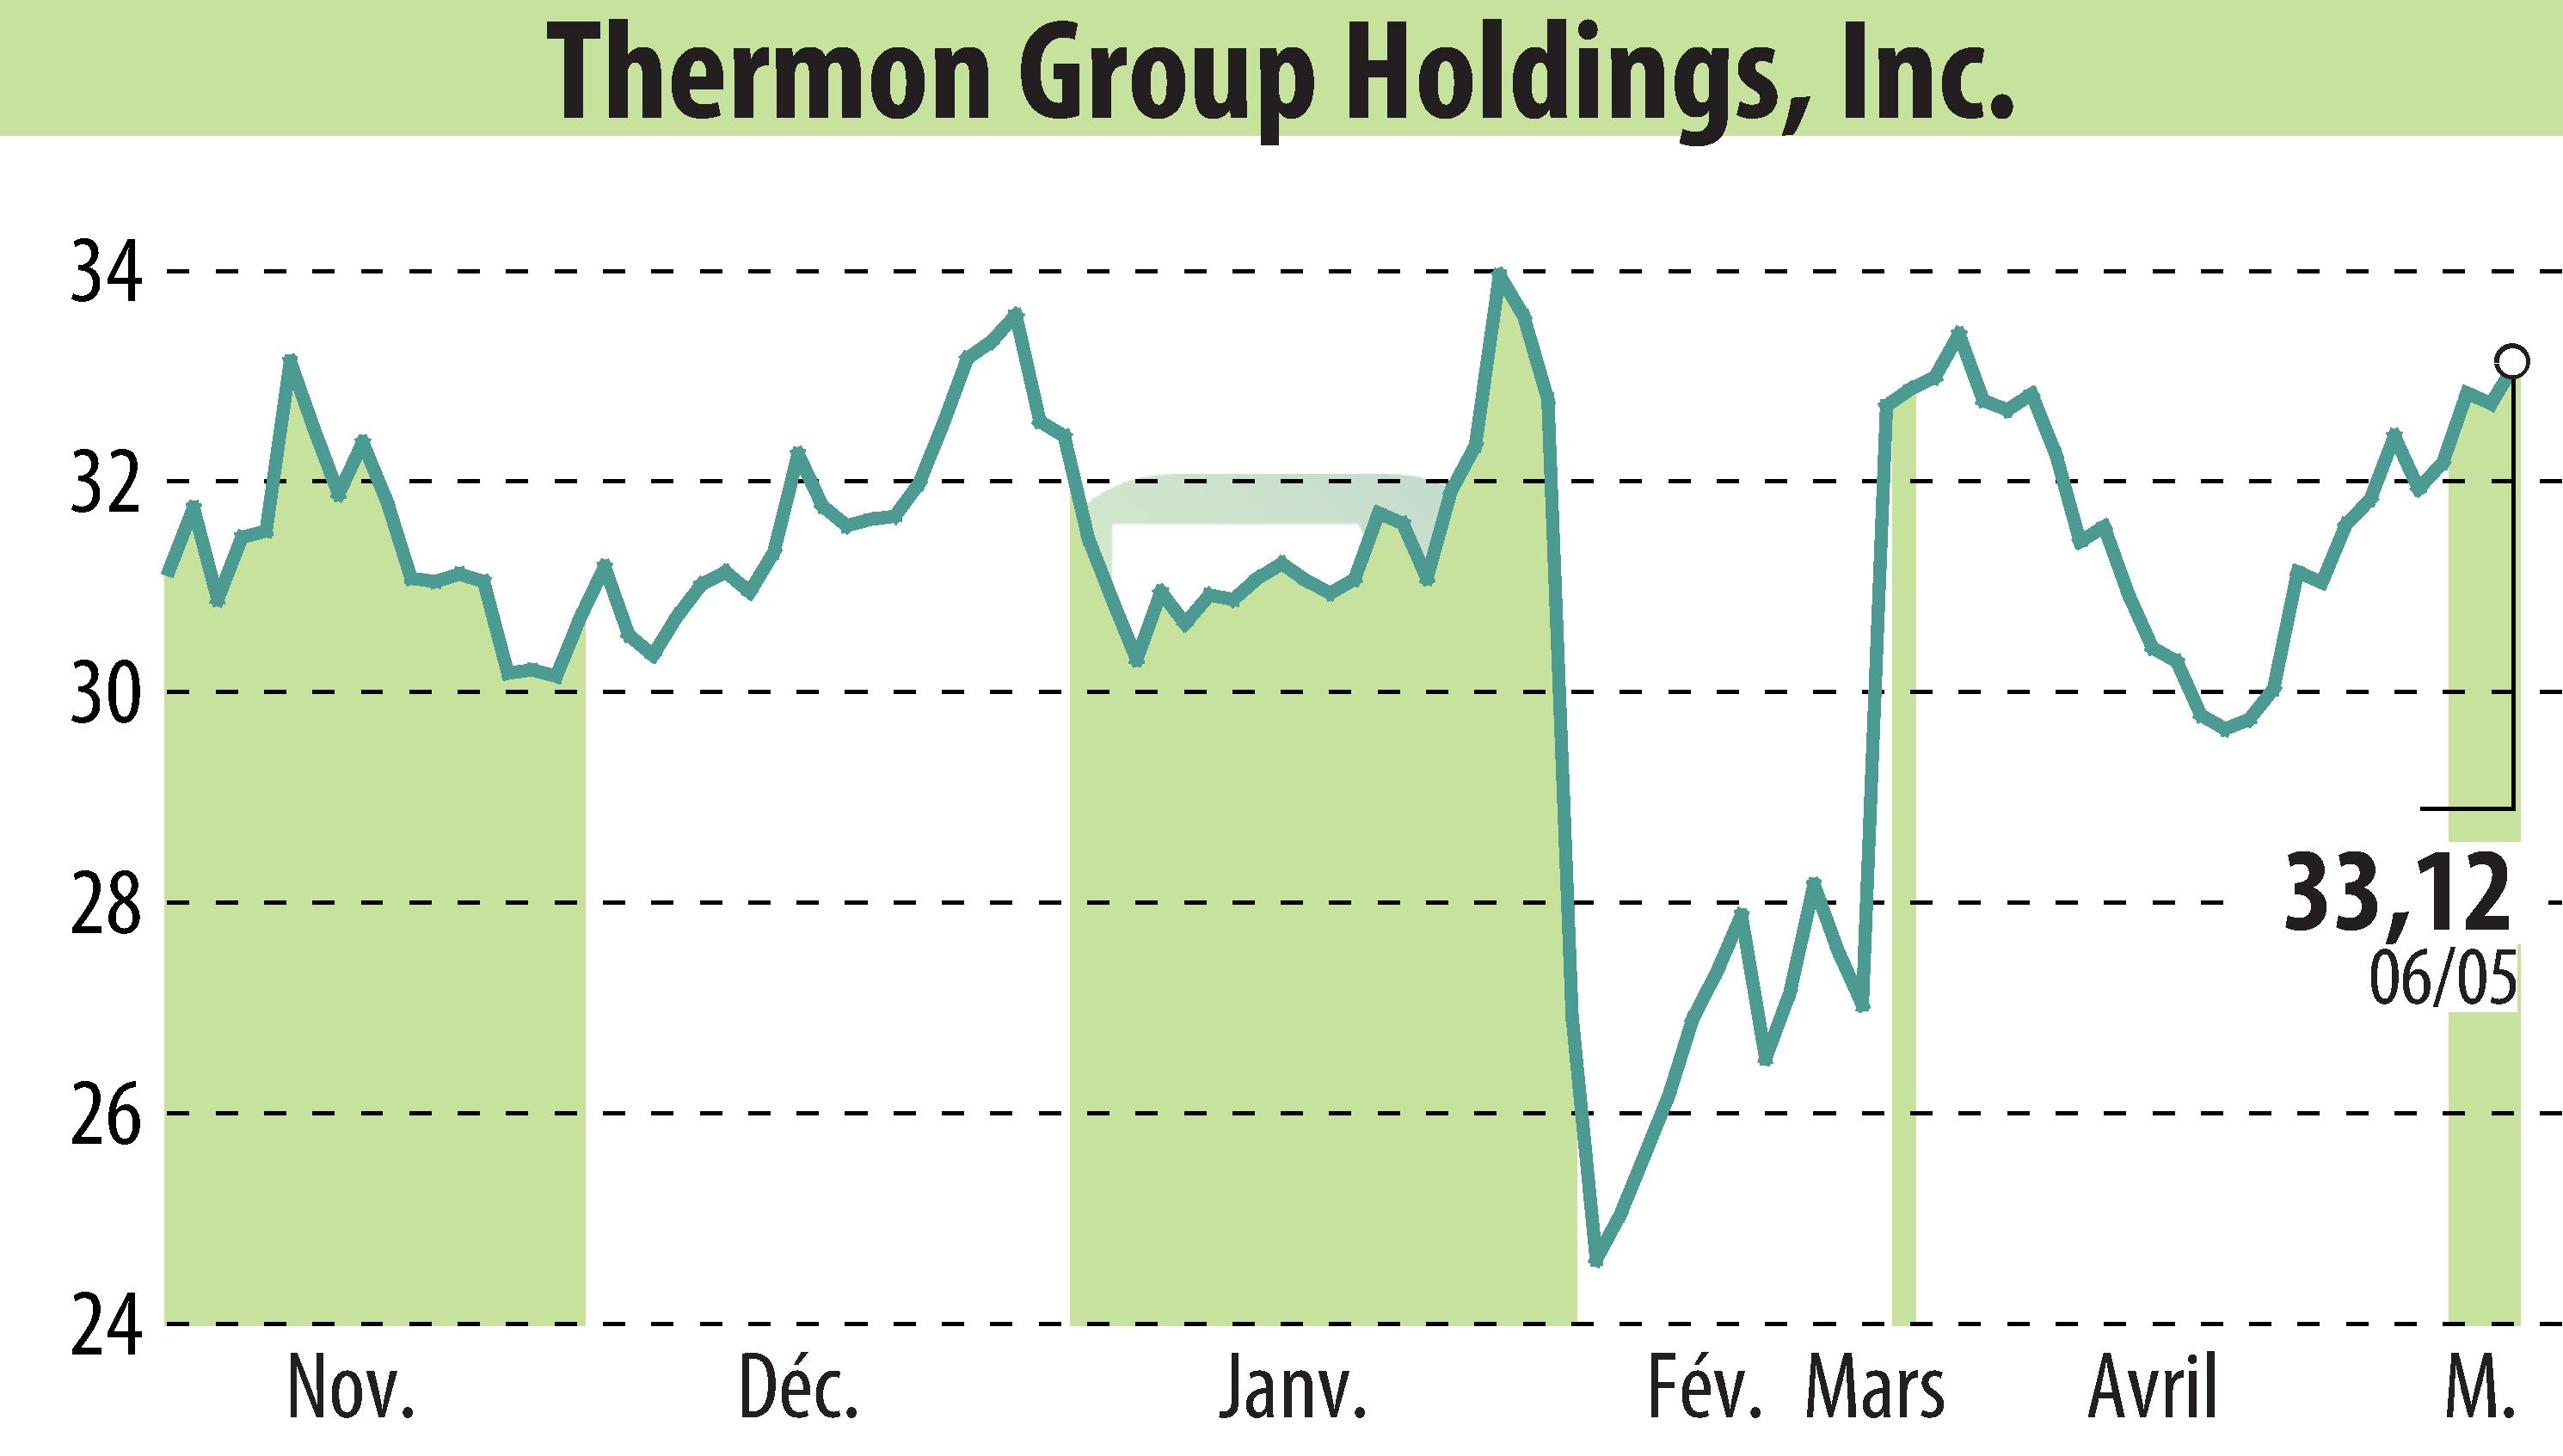 Stock price chart of Thr (EBR:THR) showing fluctuations.